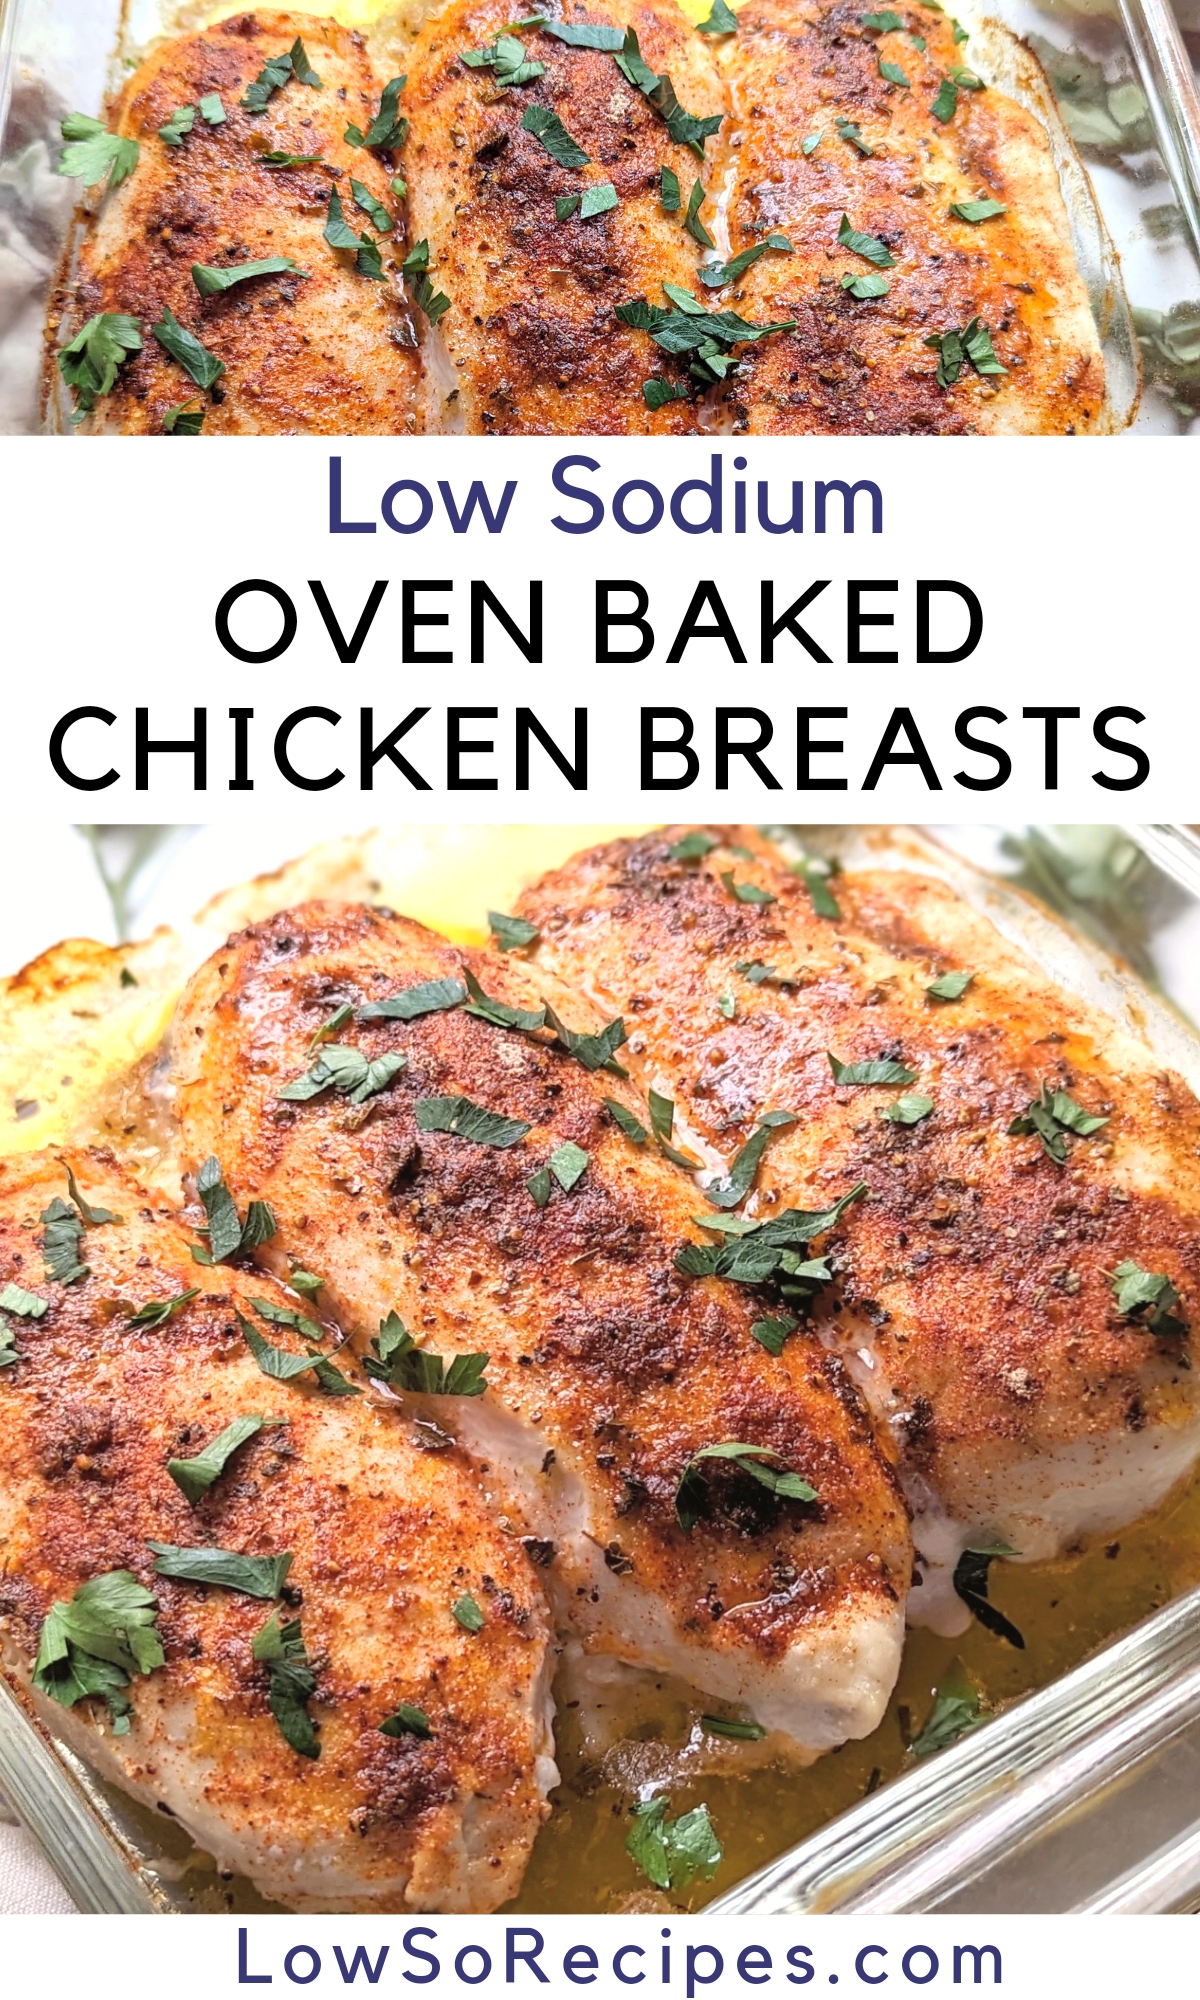 low sodium oven baked chicken breasts easy low sodium chicken recipes for dinner holidays easy home cooked salt free meal ideas